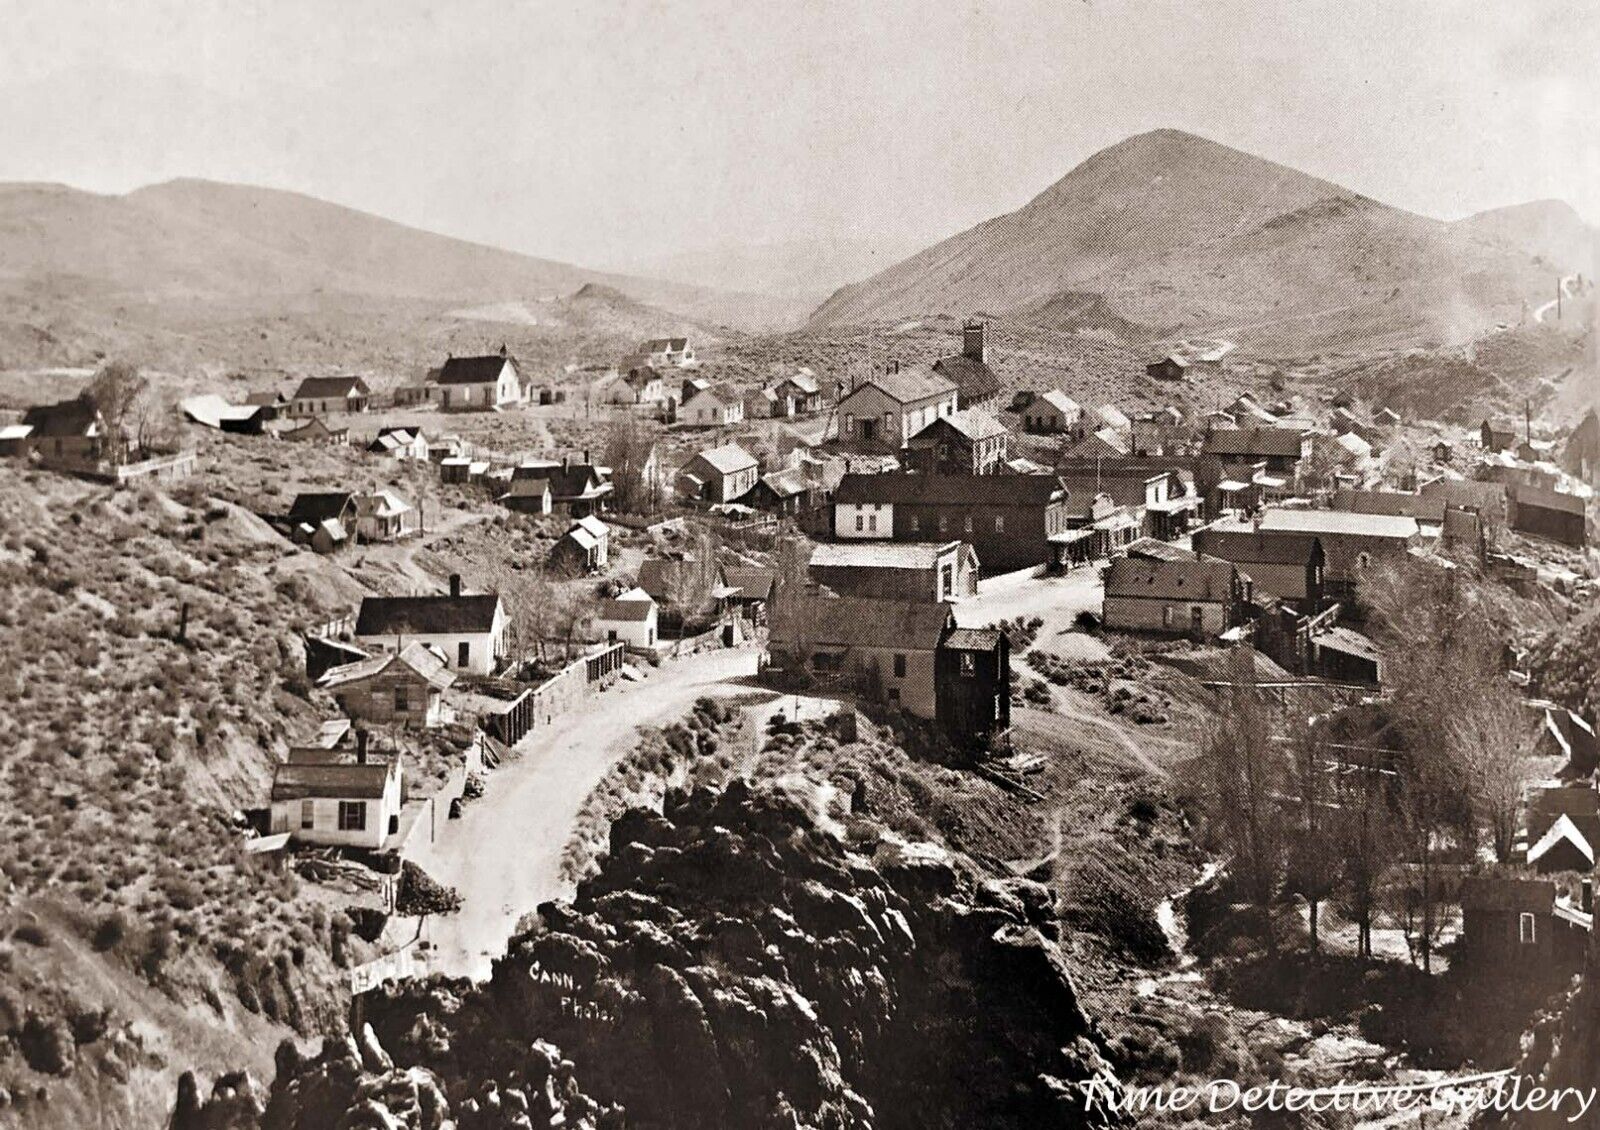 A View of Silver City, Nevada in the 1870s - Historic Photo Print